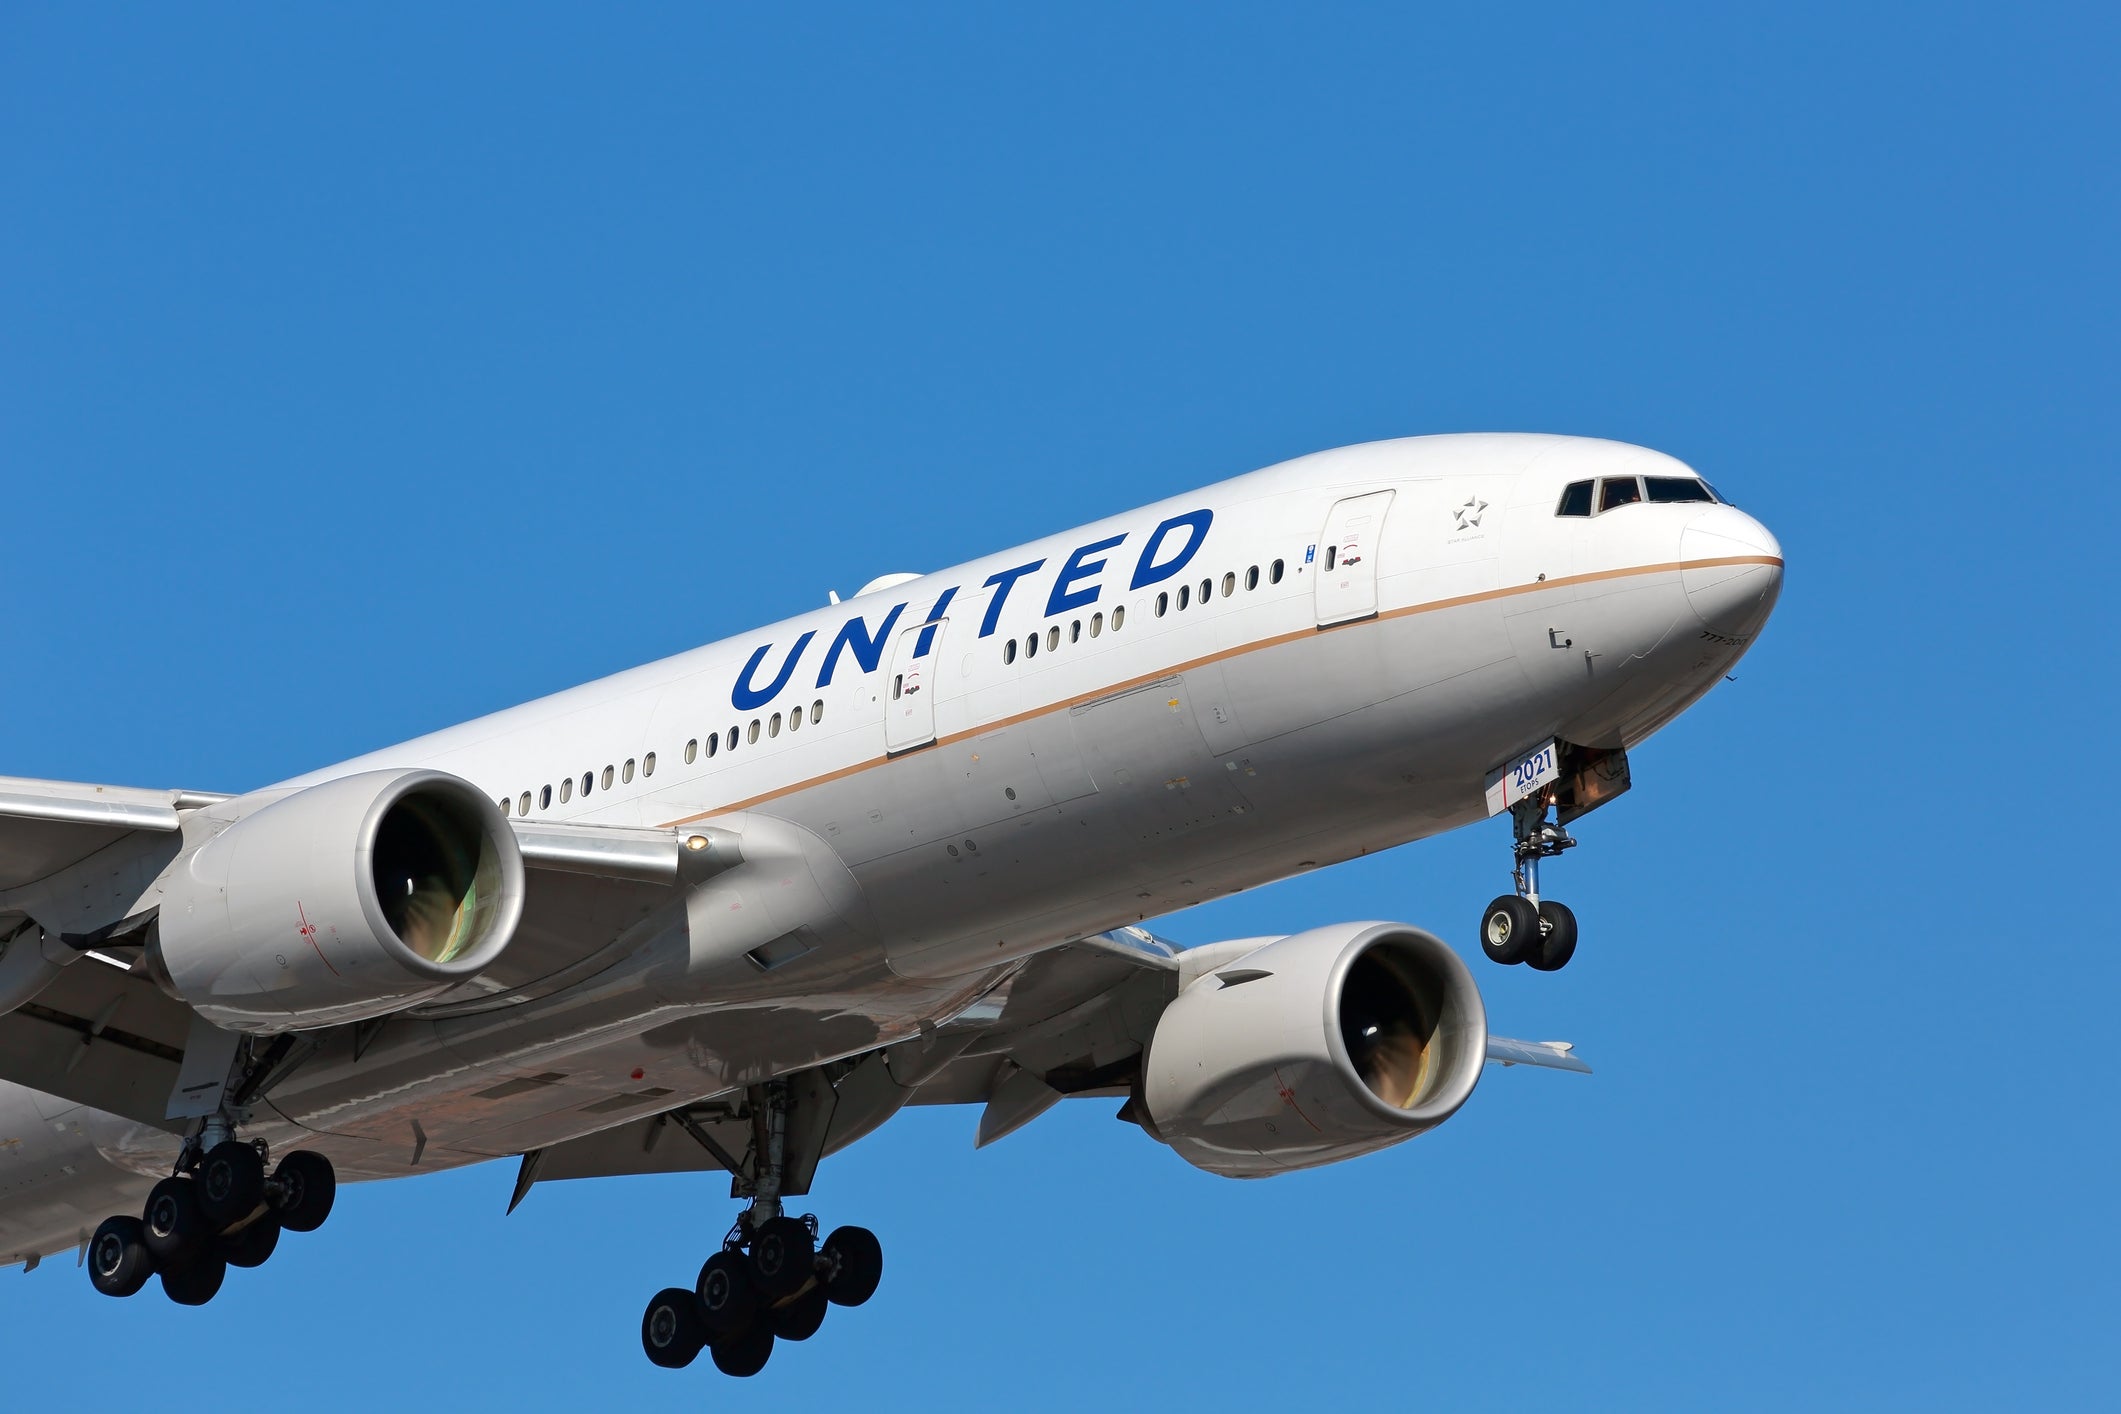 United Airlines is being sued, along with Austrian Airlines